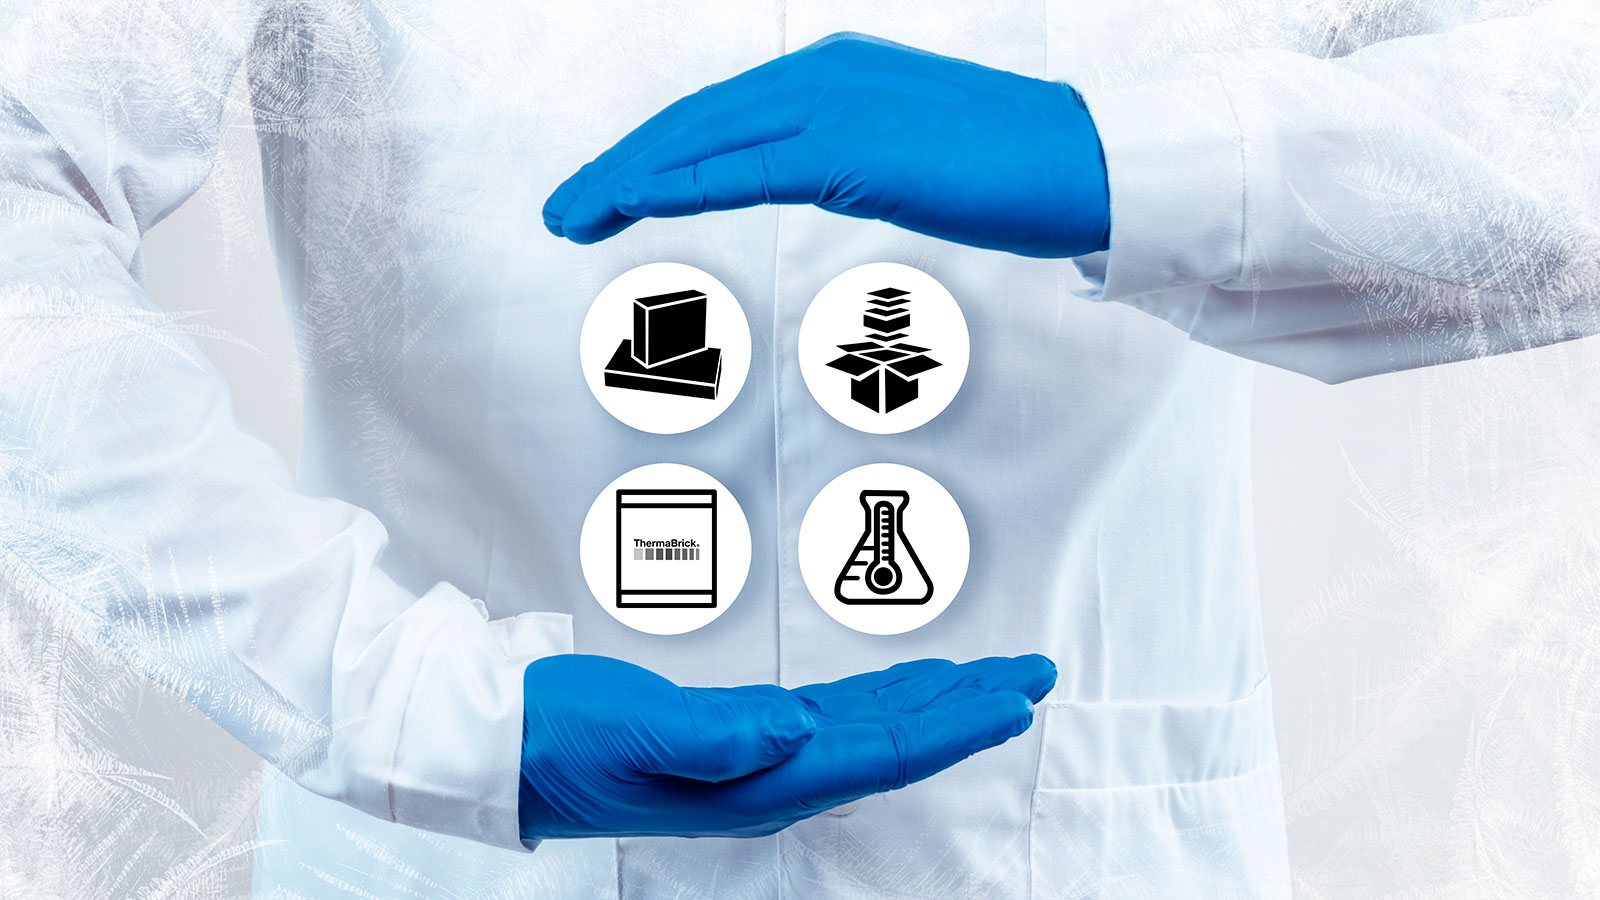 Two hands in rubber gloves holding icons for pharmaceuticals, temperature controlled boxes, and ThermaBrick packaging